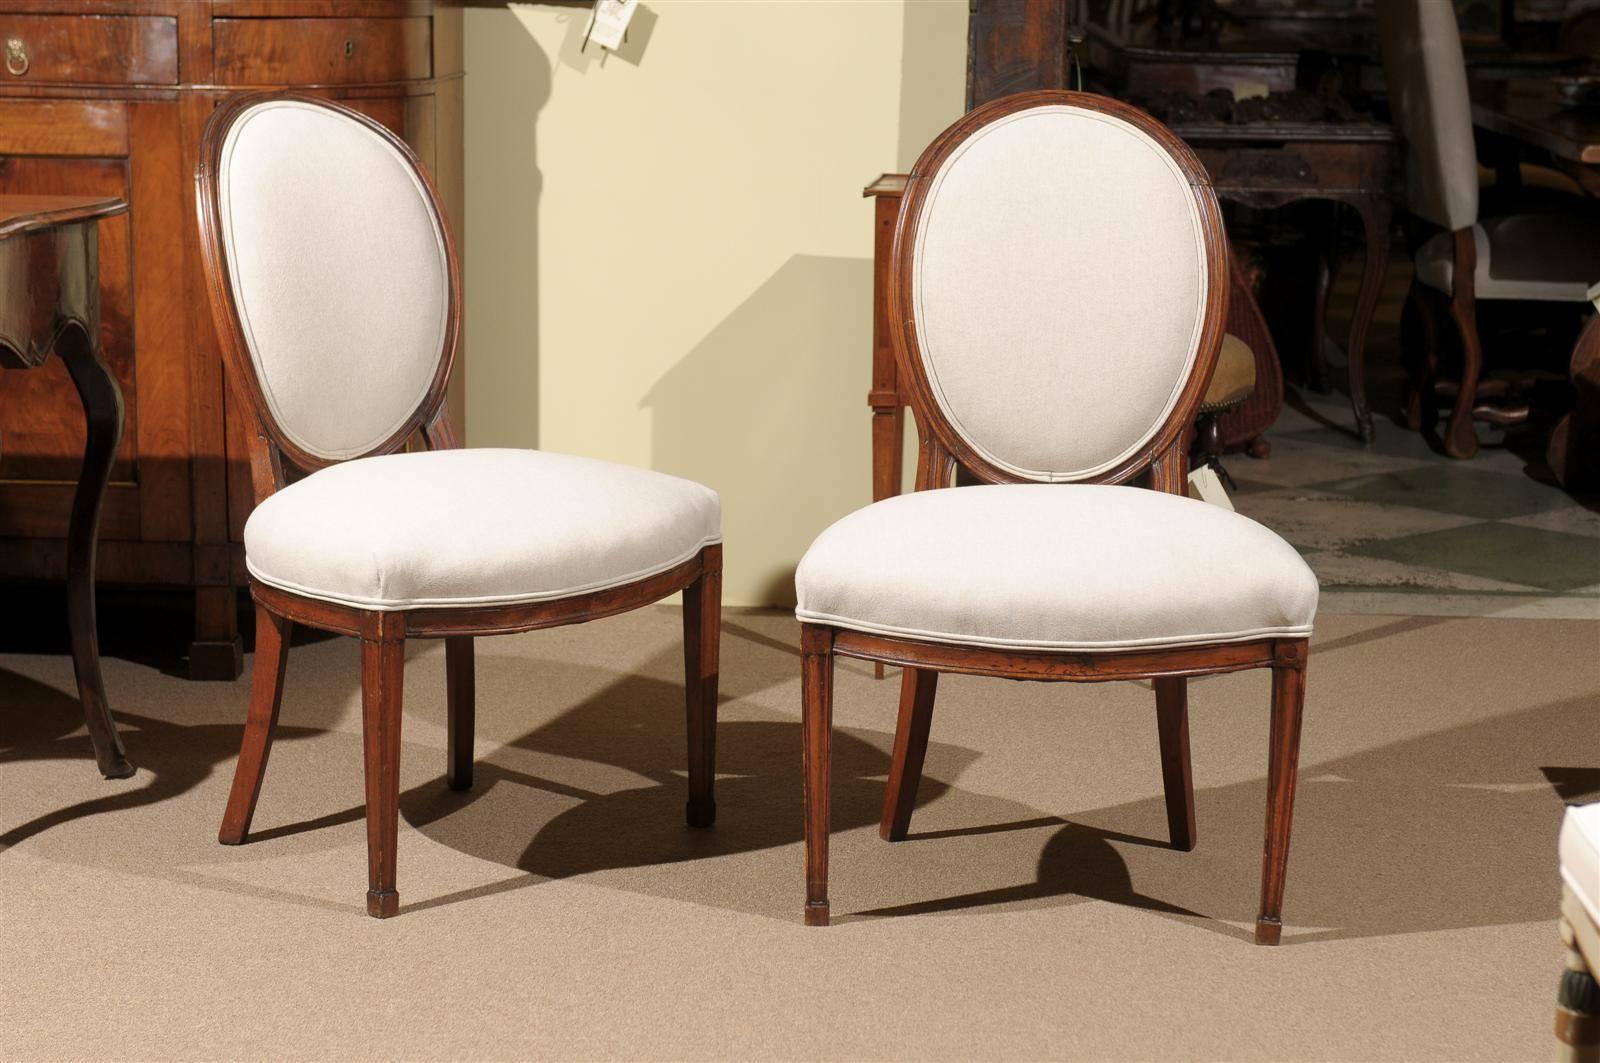 Pair of Louis XVI period balloon back side chairs in beechwood, France, circa 1780.